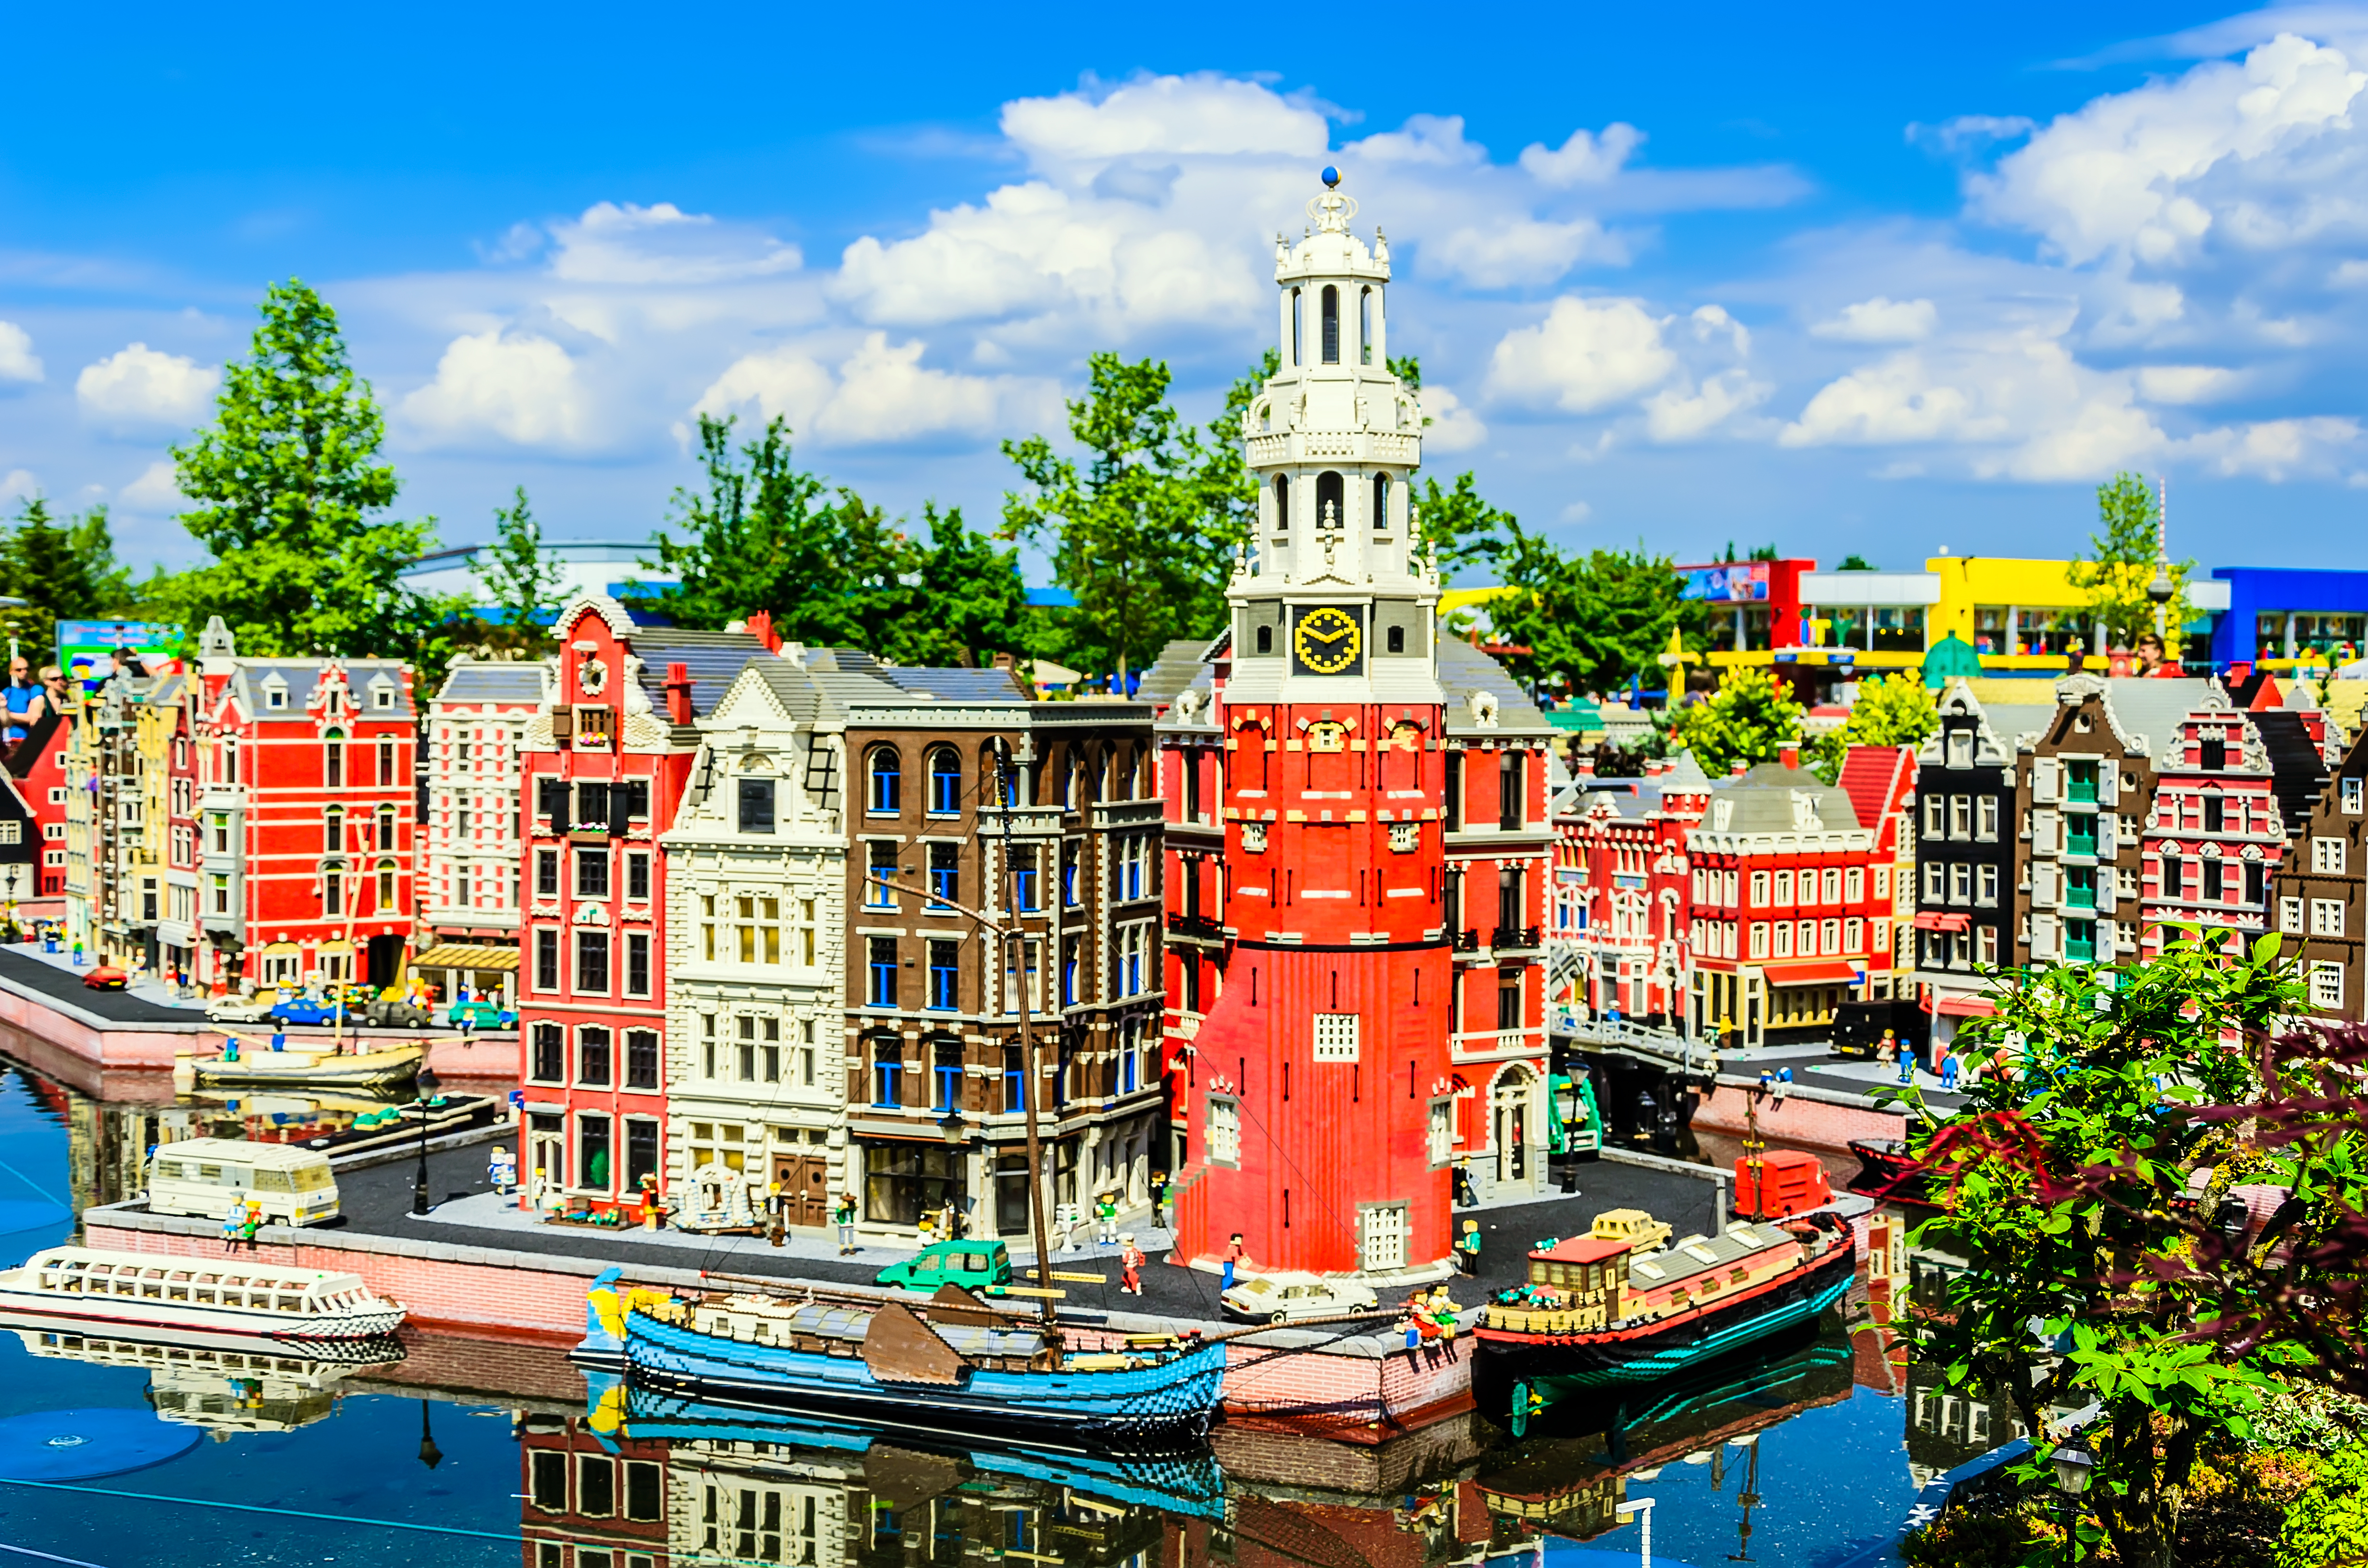 Amsterdam, beautiful landscaped town built from Lego blocks.